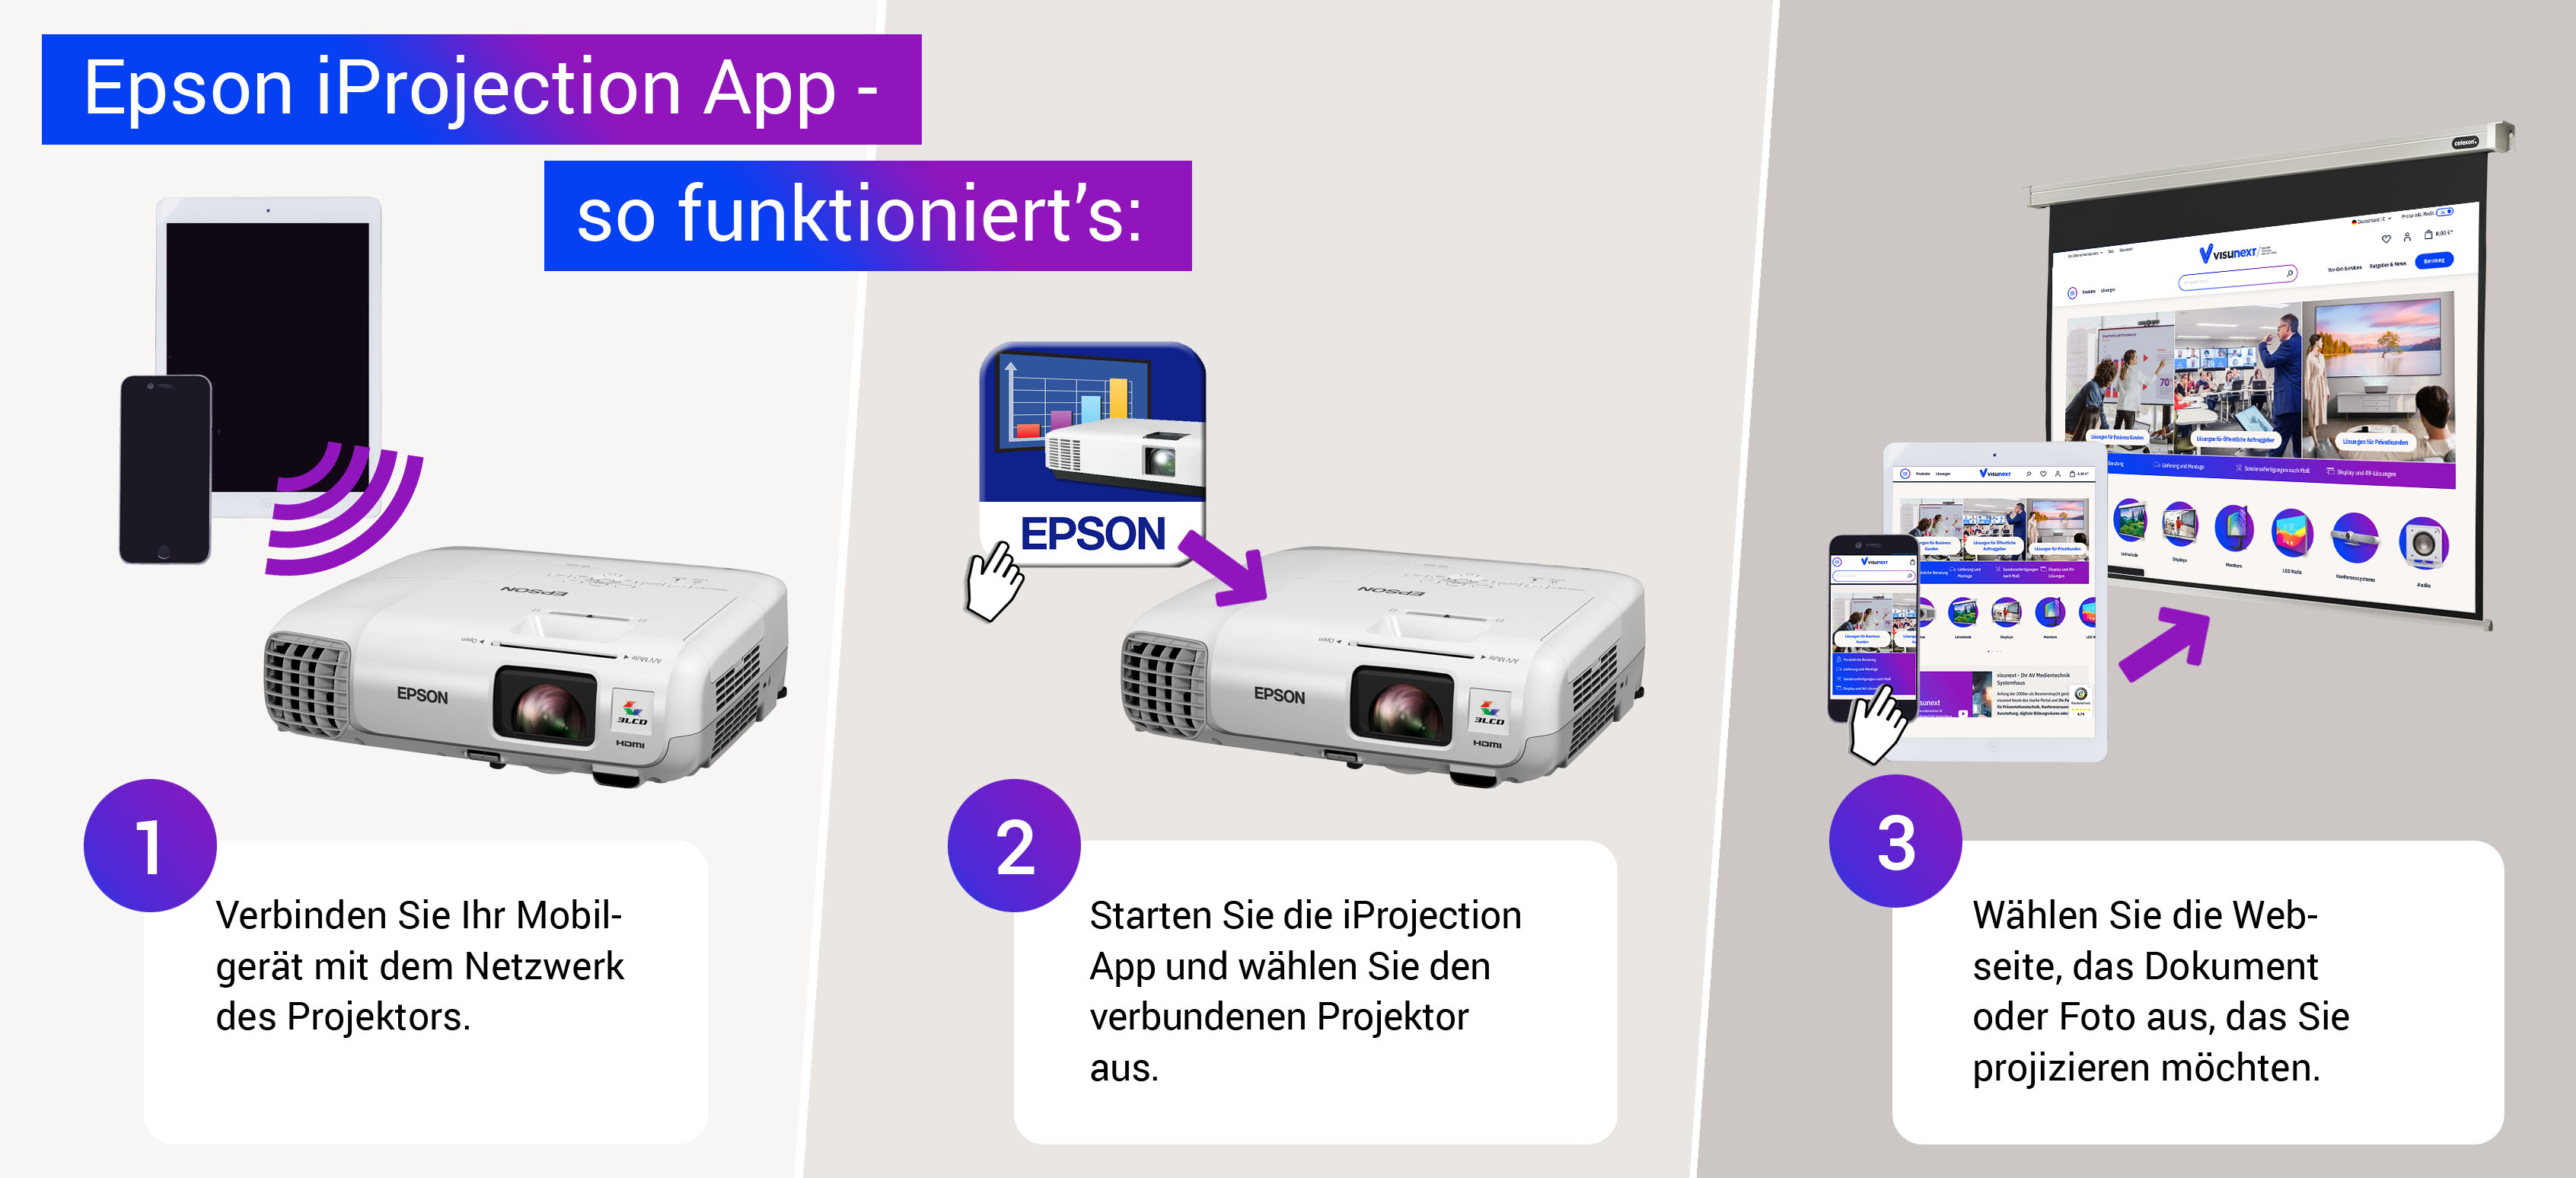 epson-iprojection-app